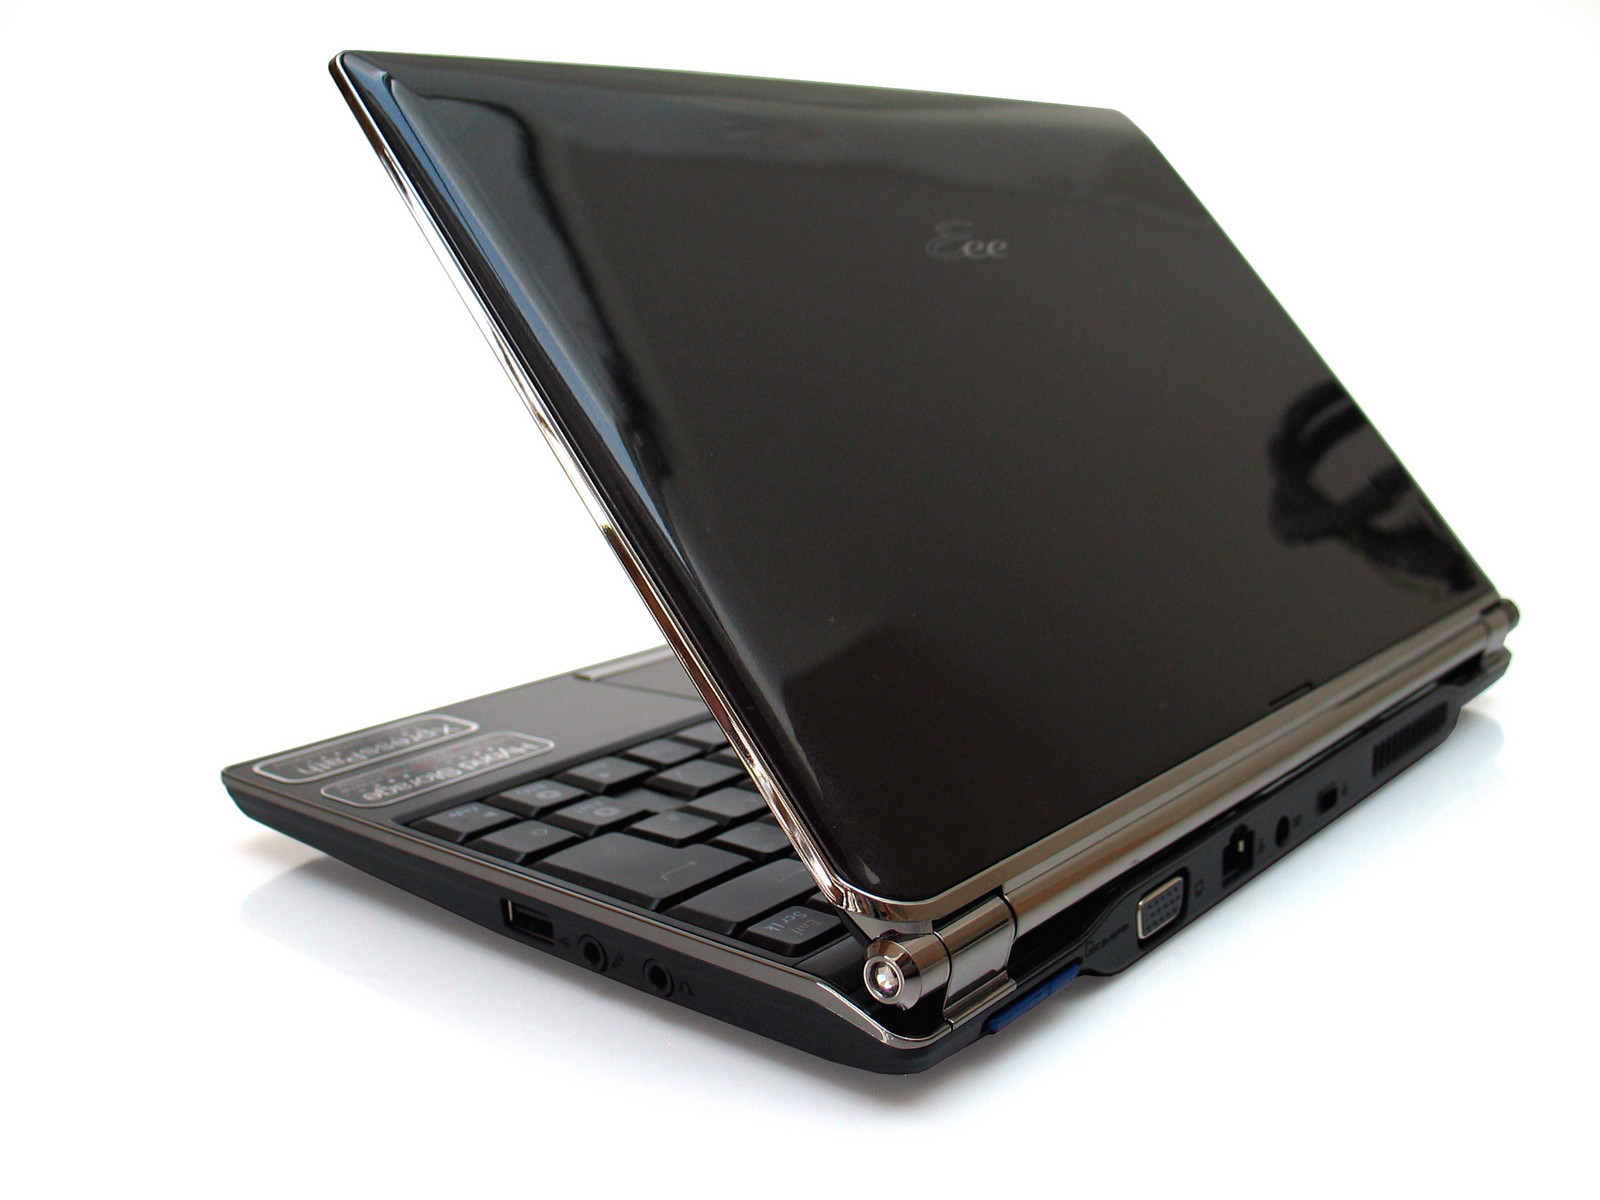 Harmonie Madison boter Asus Eee PC S101 - Notebookcheck.net External Reviews